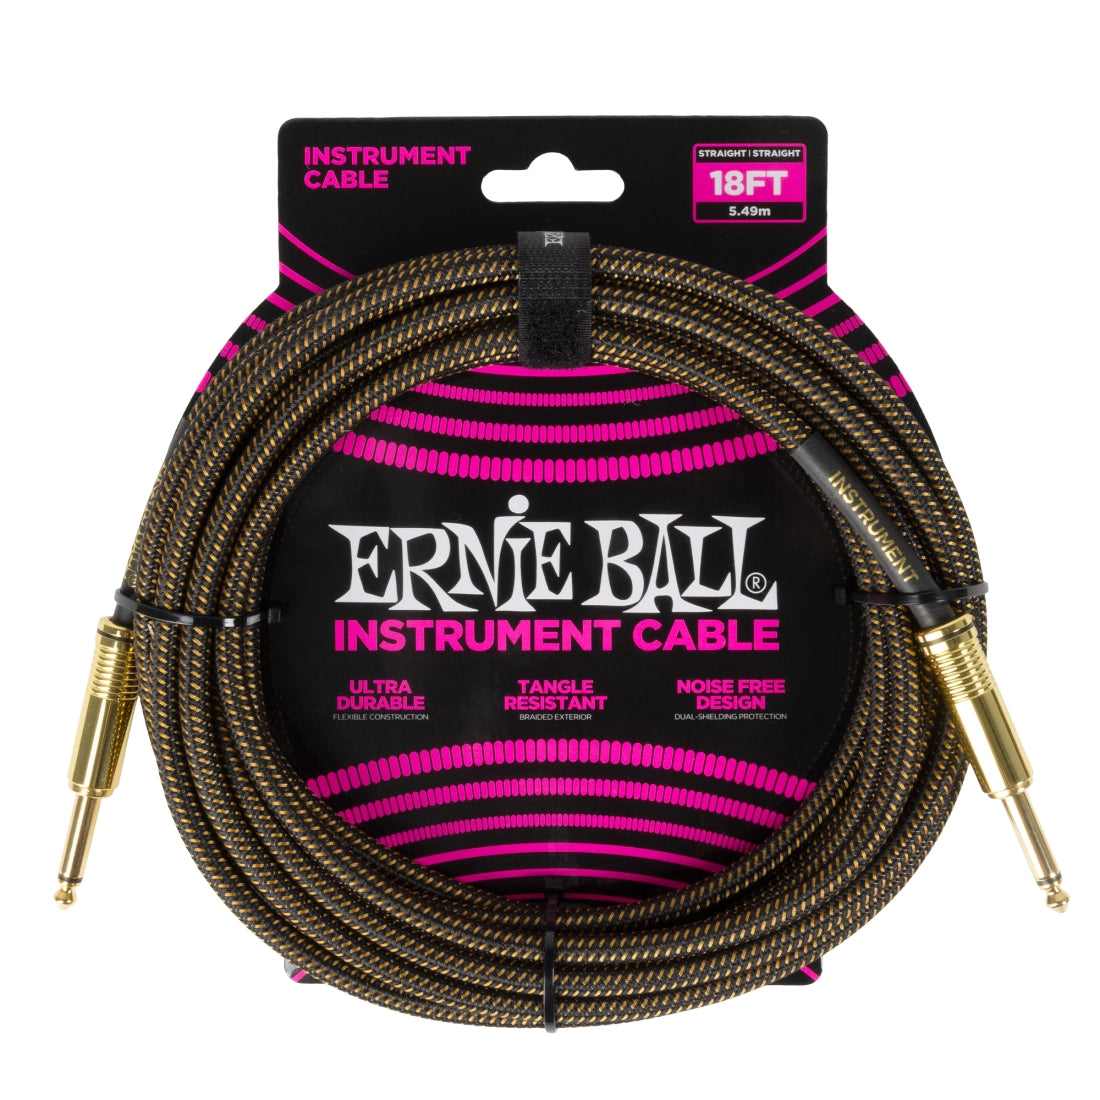 Ernie Ball 18ft Braided Instrument Cable - Pay Dirt - Joondalup Music Centre